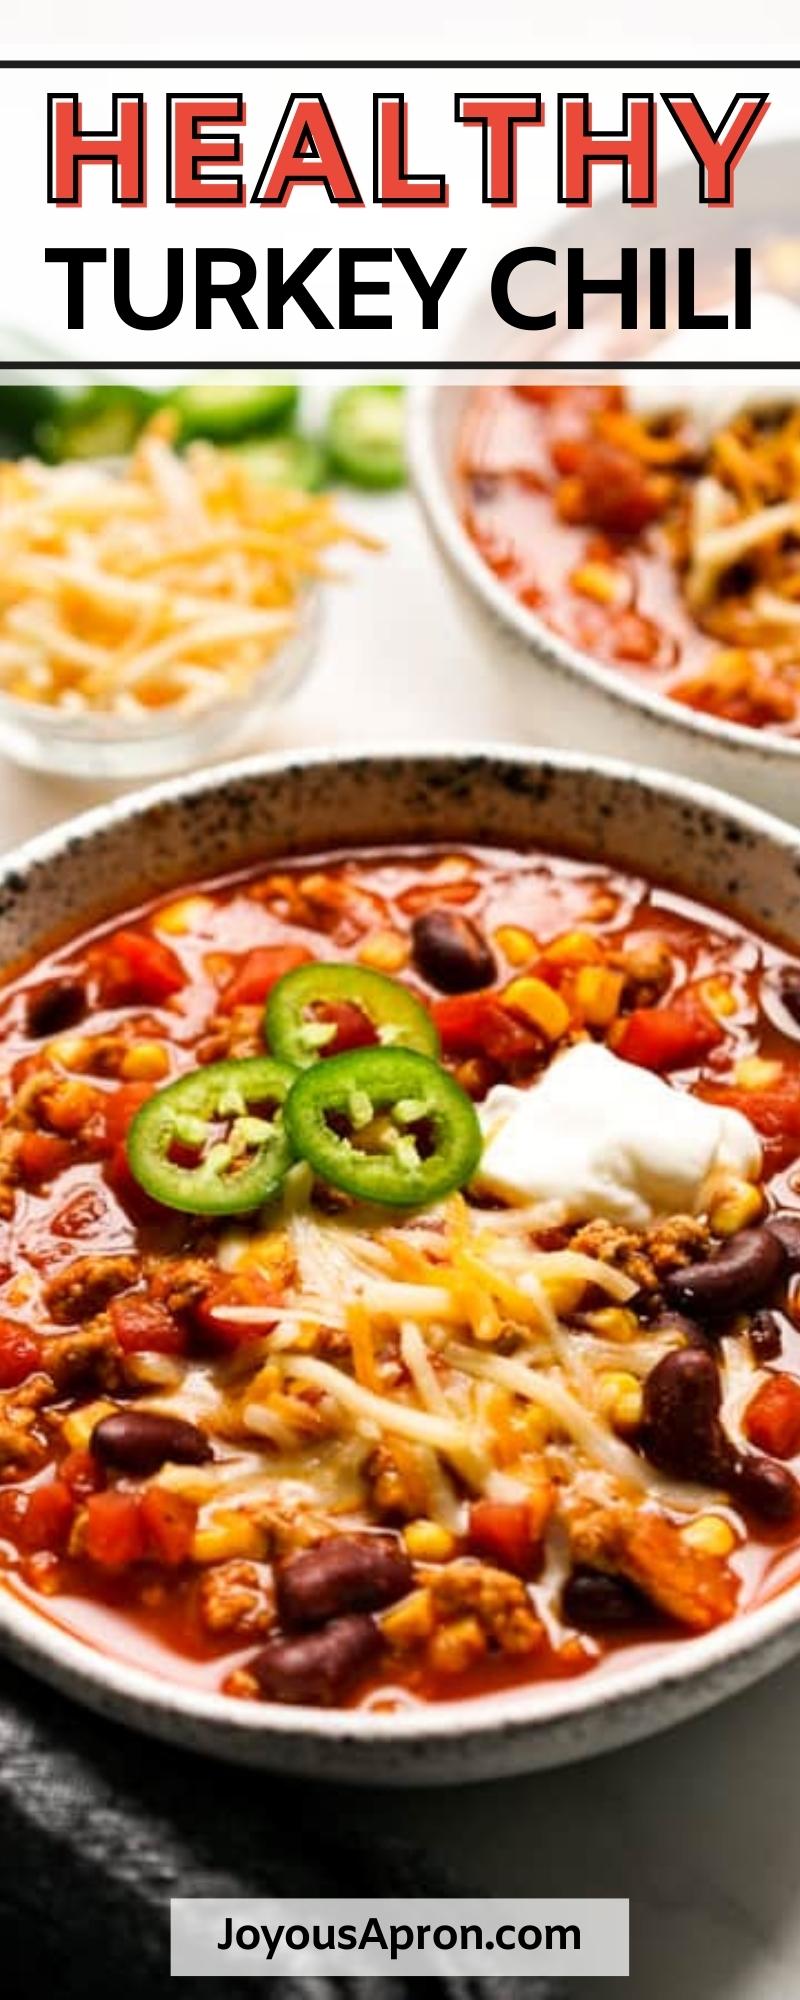 Healthy Turkey Chili - easy dinner recipe - ready in 30 minutes! Made with ground turkey, this tomato-based chili is chunky, cozy, and packed full of bold flavors and great textures. via @joyousapron